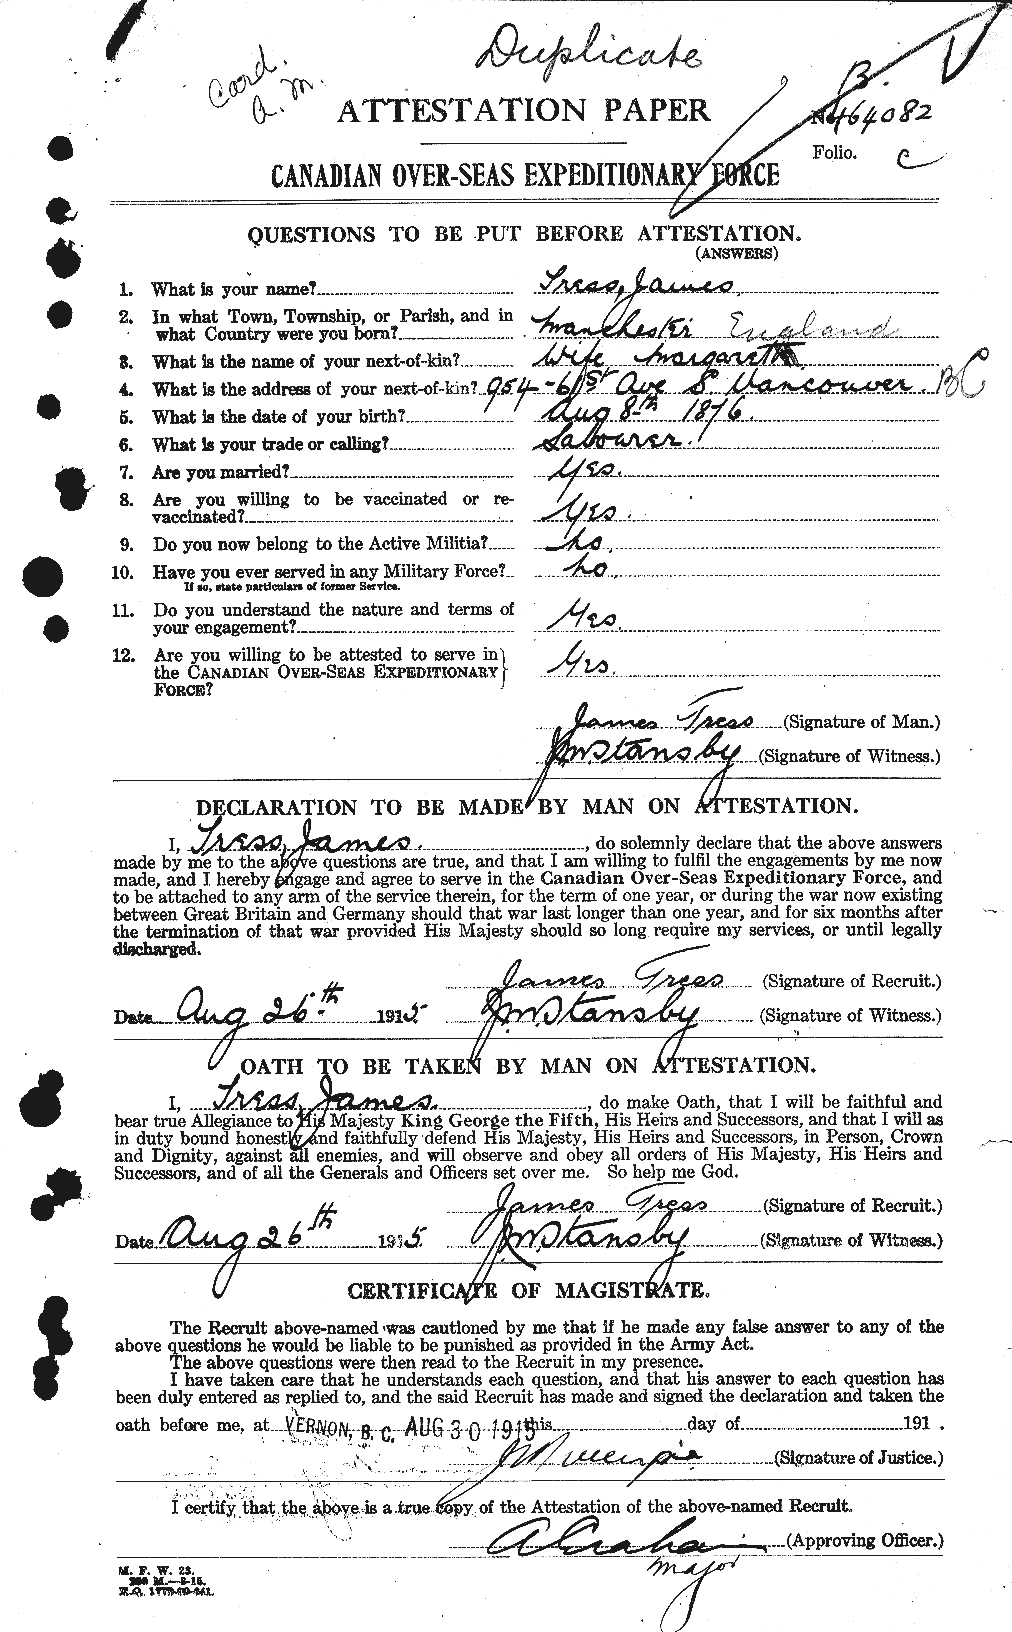 Personnel Records of the First World War - CEF 638589a